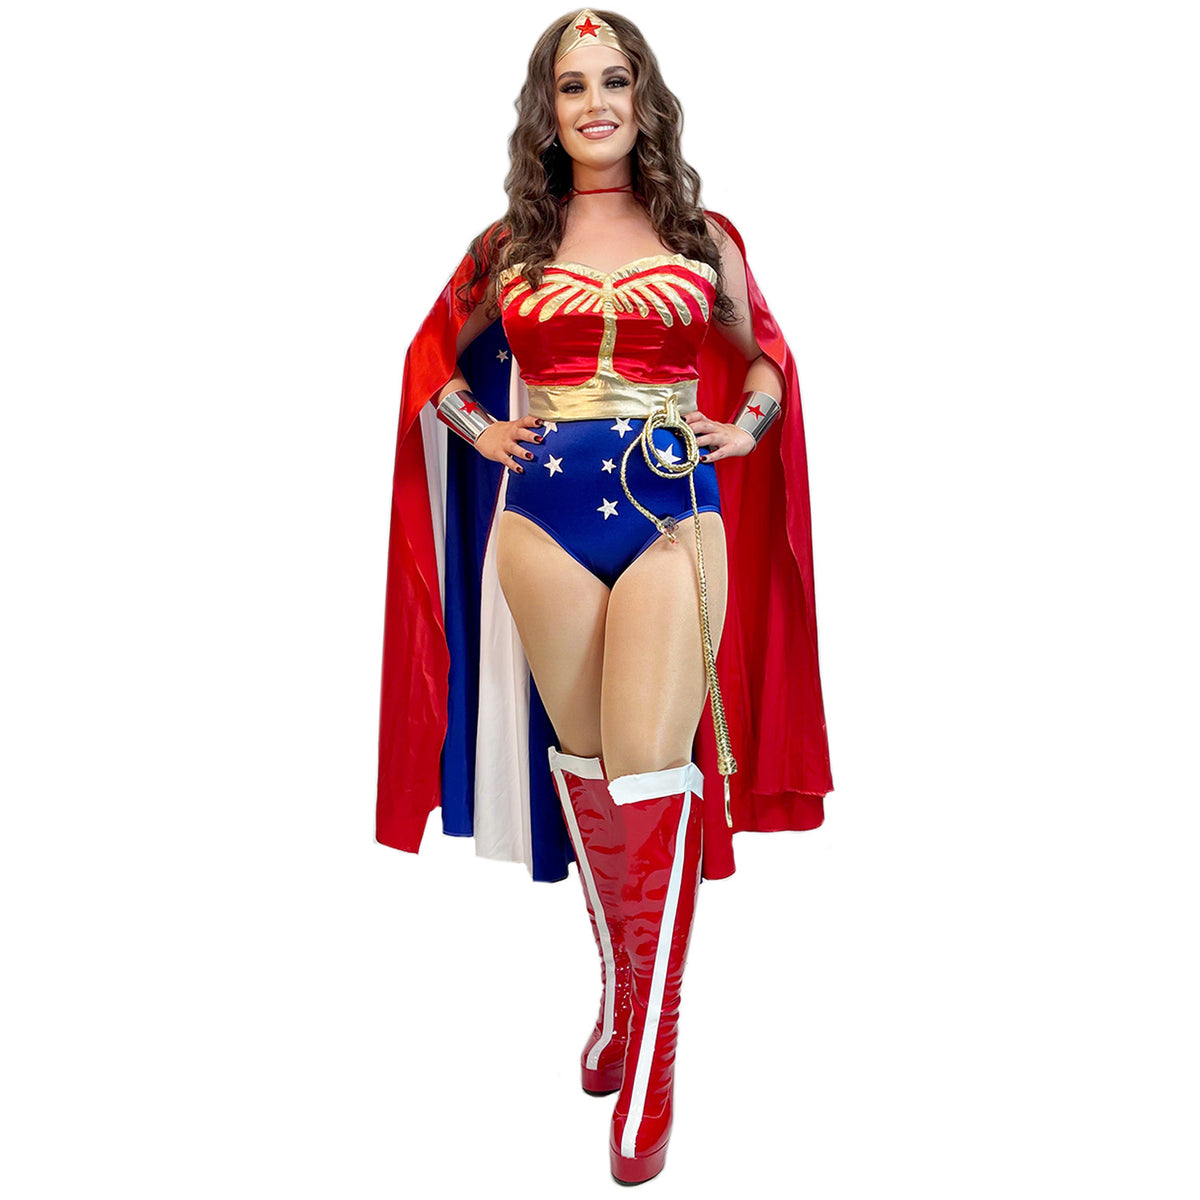 Wonder Woman Inspired Adult Costume w/ Cape, Gold Crown, Lasso